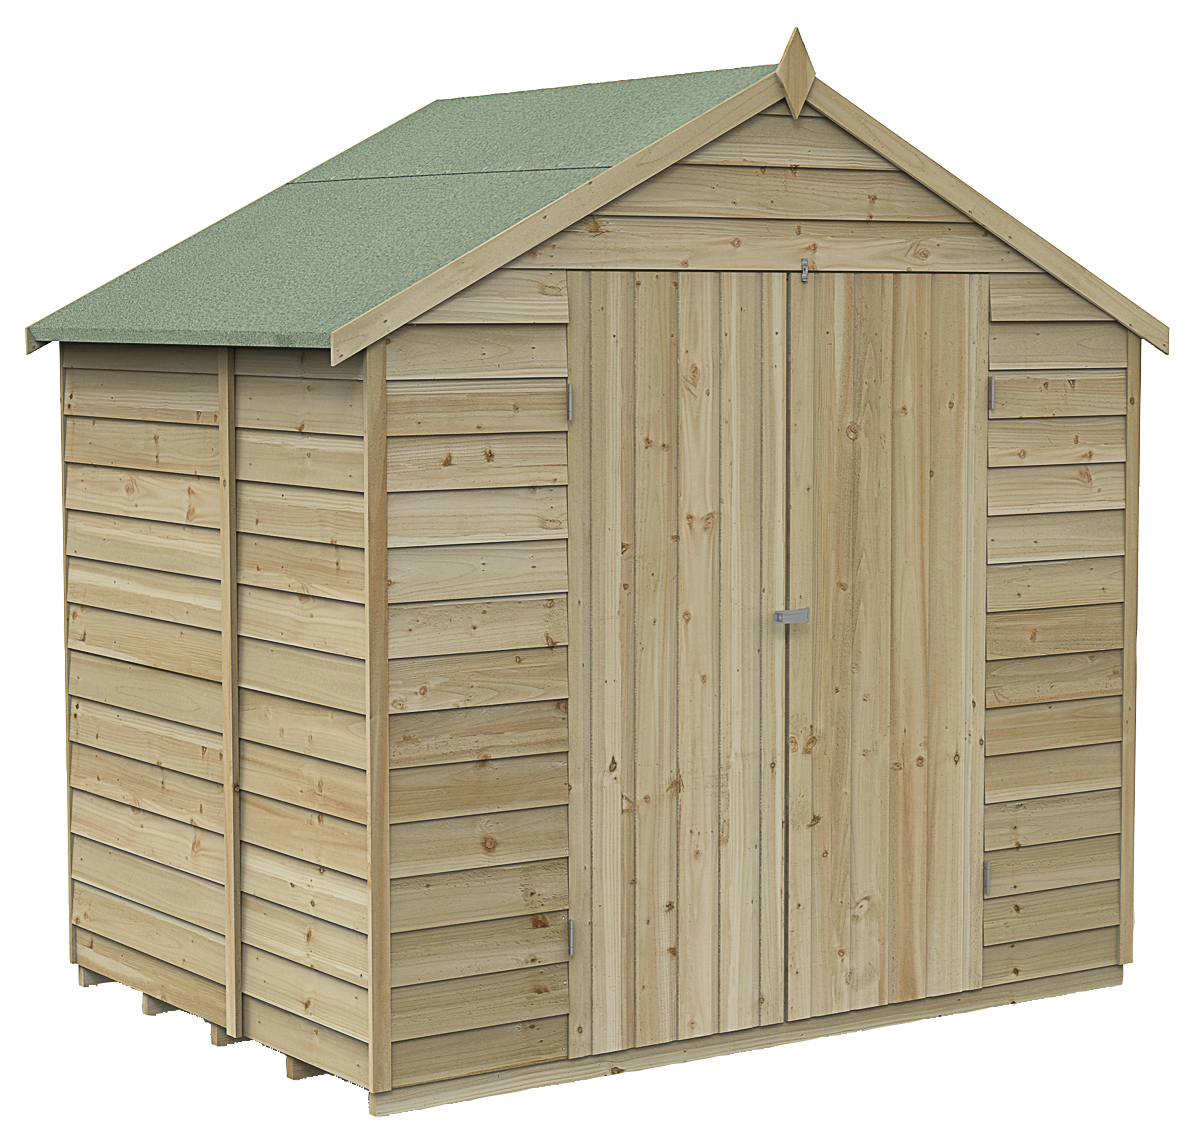 Forest Garden 7 x 5ft 4Life Apex Overlap Pressure Treated Double Door Windowless Shed with Assembly